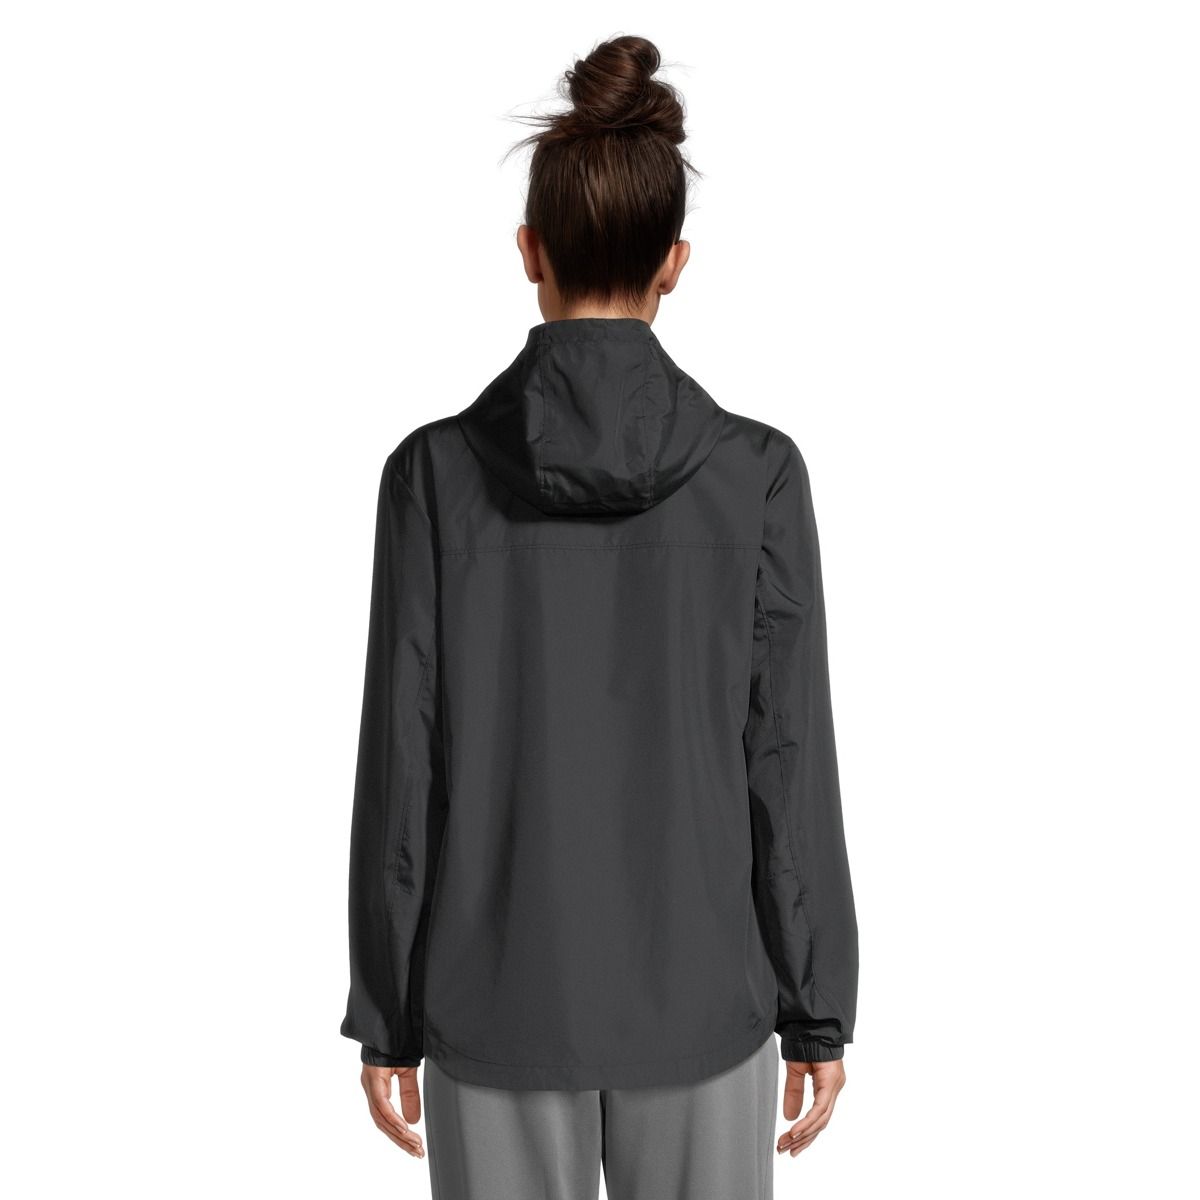 https://media-www.sportchek.ca/product/div-03-softgoods/dpt-70-athletic-clothing/sdpt-02-womens/333616171/lotto-ambleside-woven-jacket-blk-q122-w-afdebed9-0fb6-45be-b7f1-3463b8eaf1e4-jpgrendition.jpg?imdensity=1&imwidth=1244&impolicy=mZoom